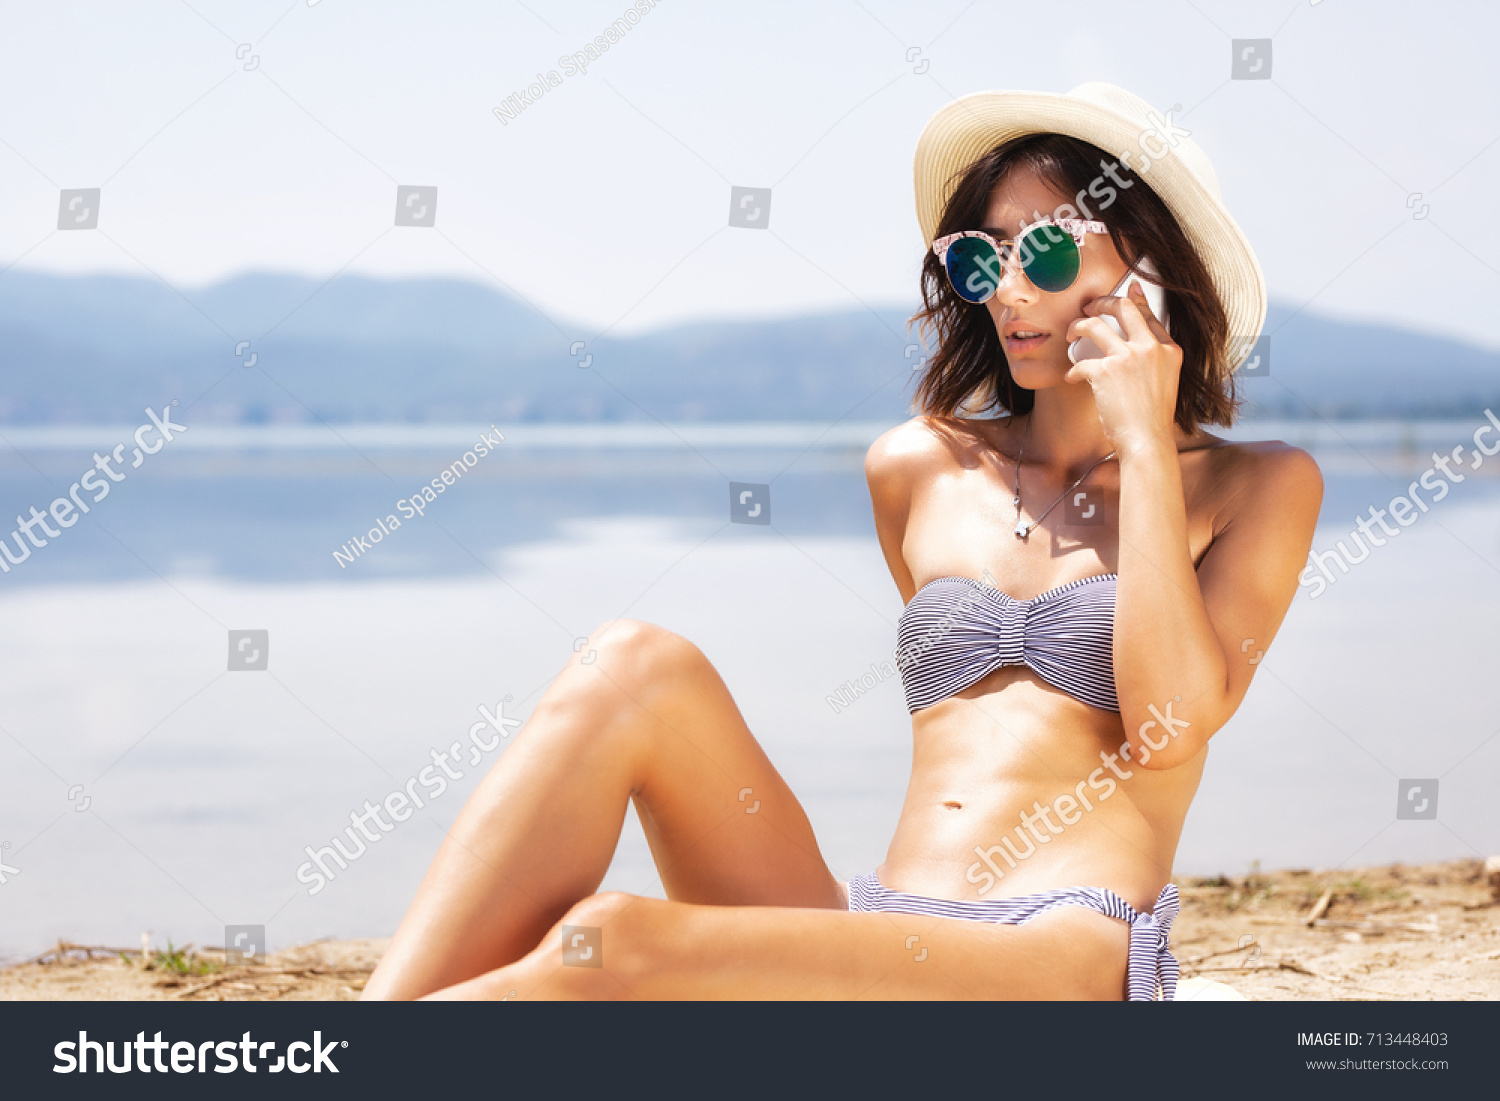 girl sunbathing and talking on a smart phone #713448403